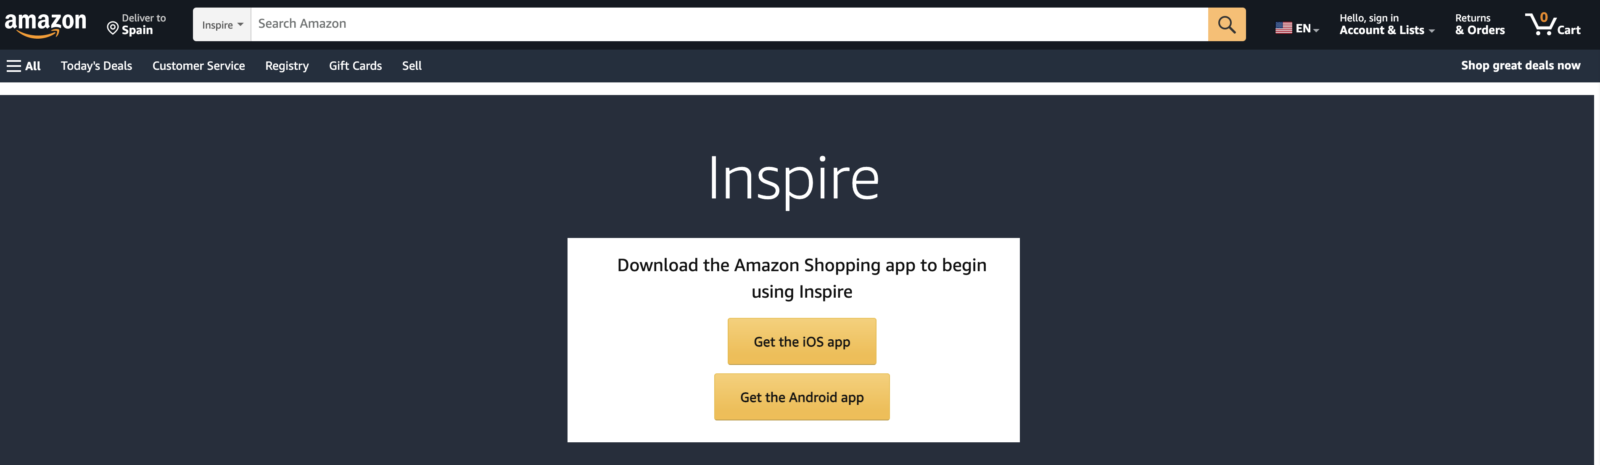 How do I sign up for AMAZON INSPIRE?